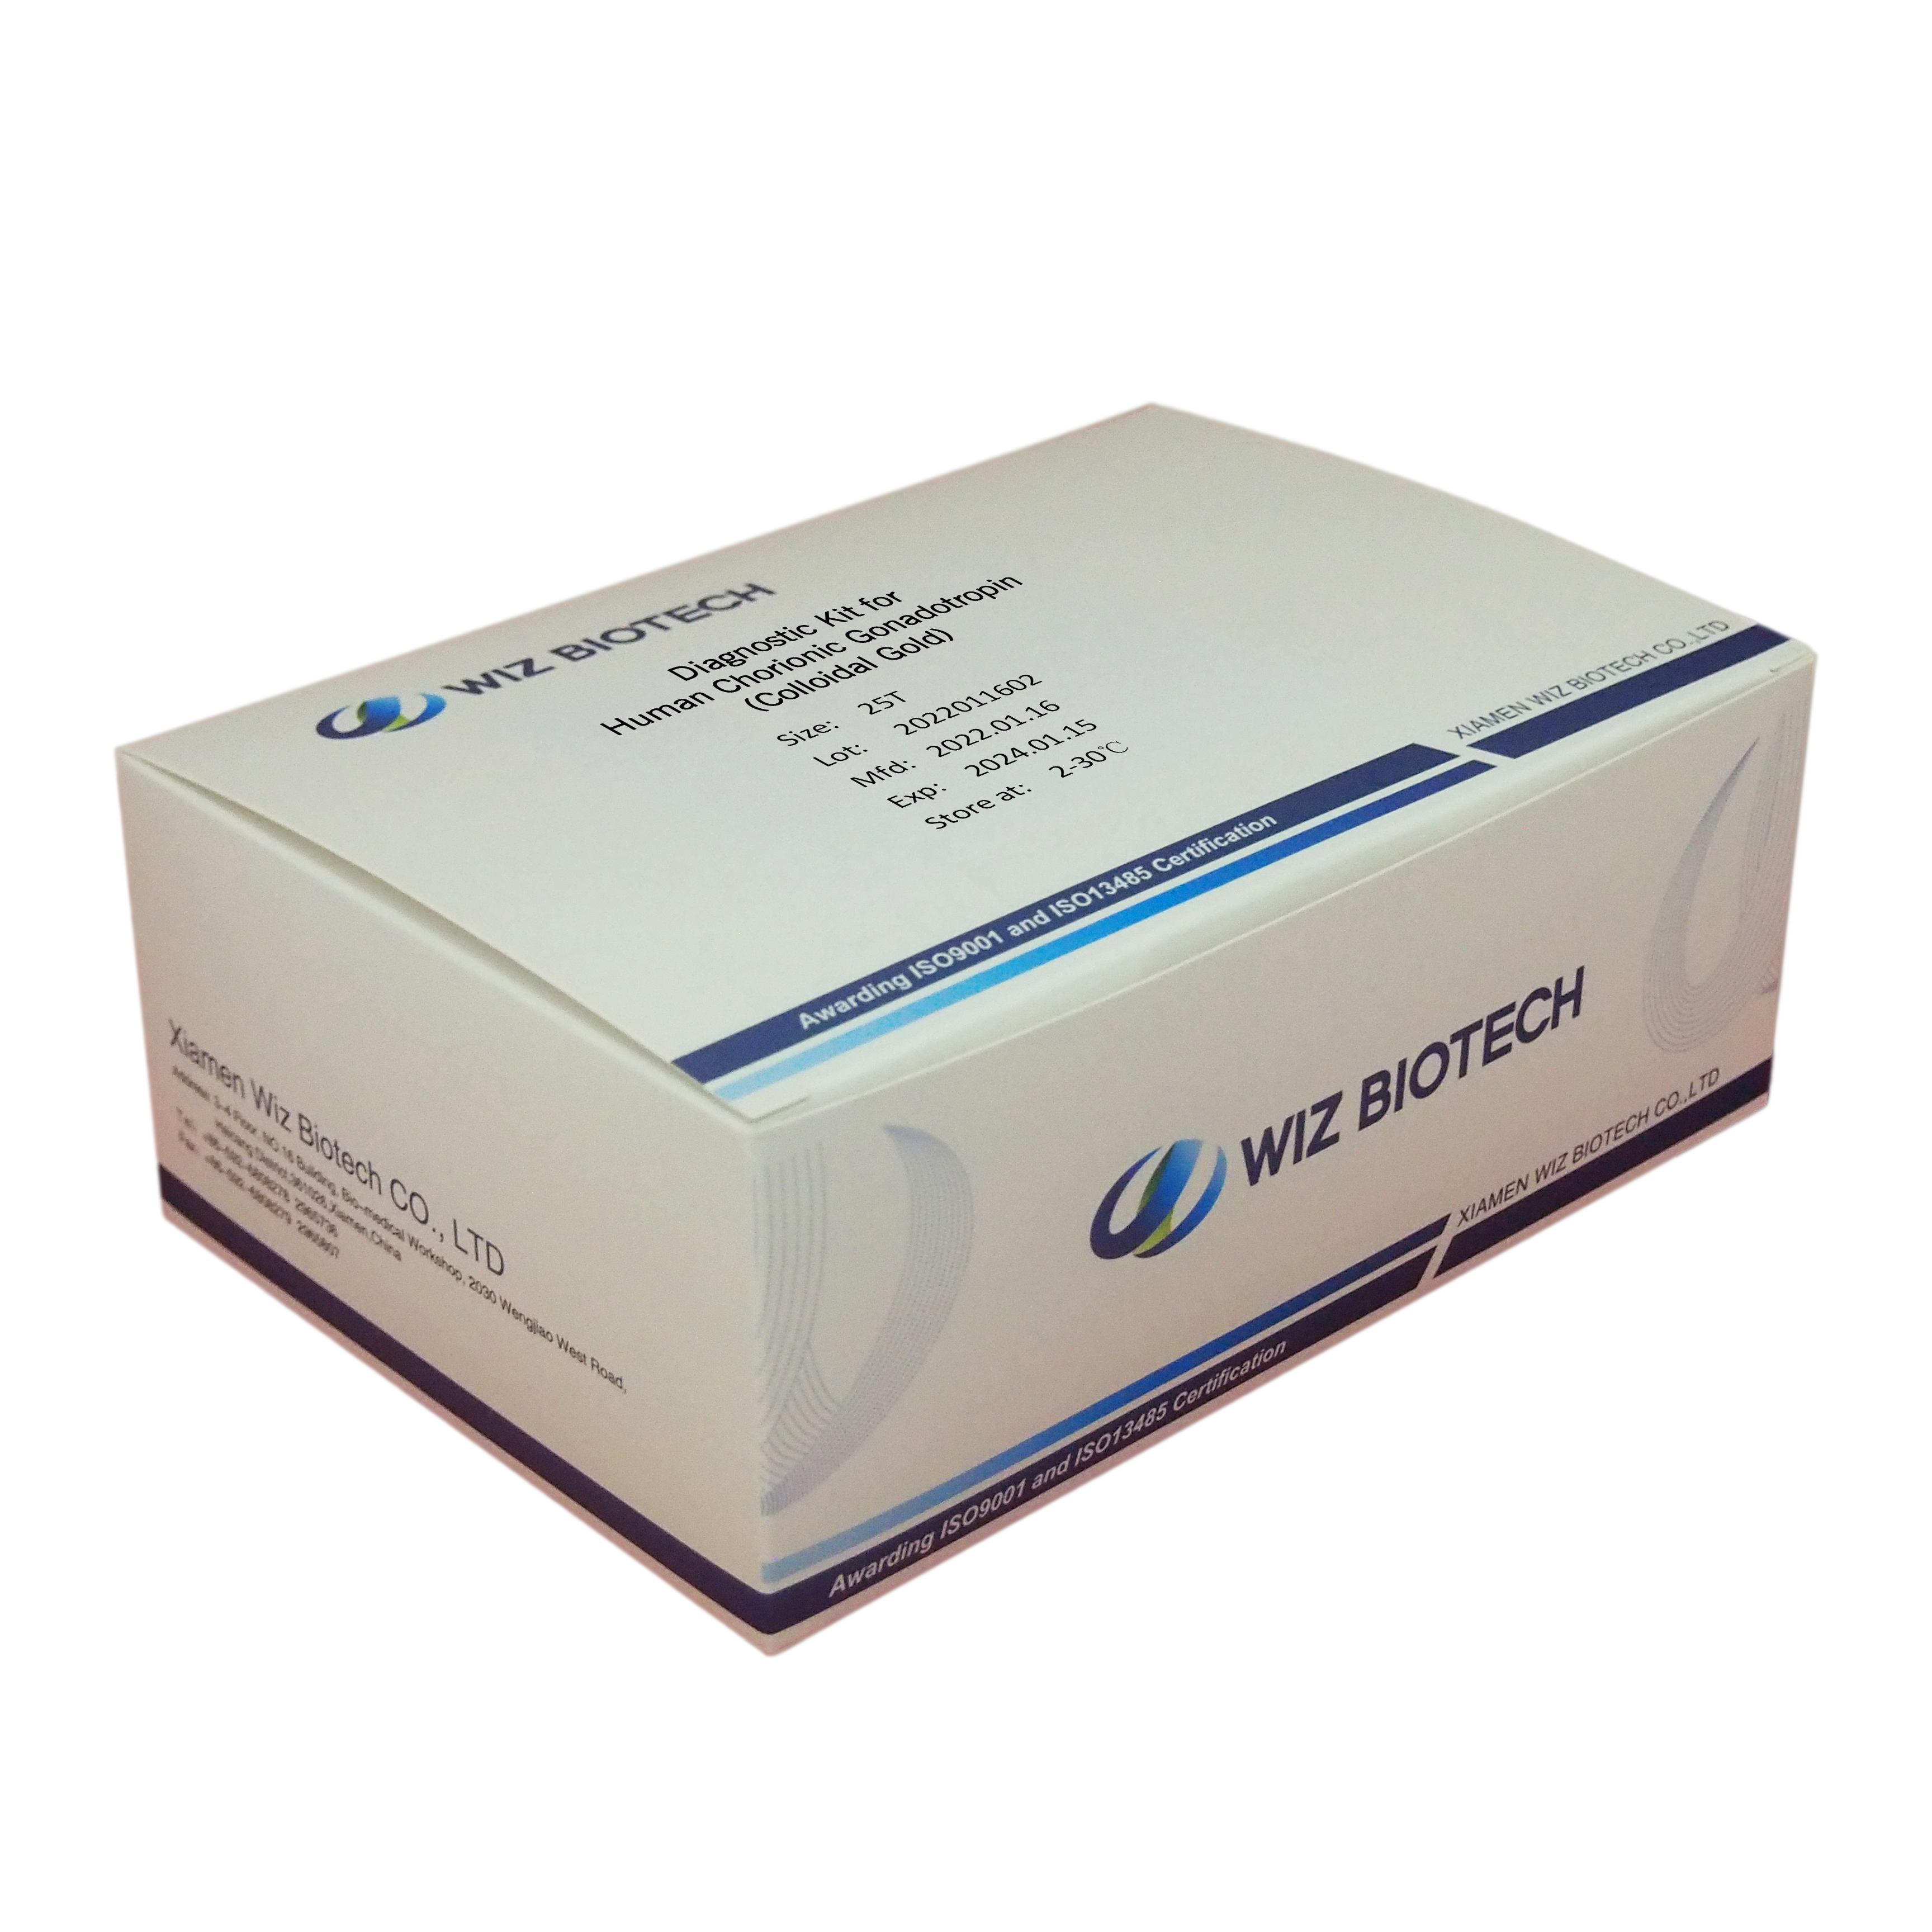 Diagnostic Kit for free β‑subunit of human chorionic gonadotropin Featured Image